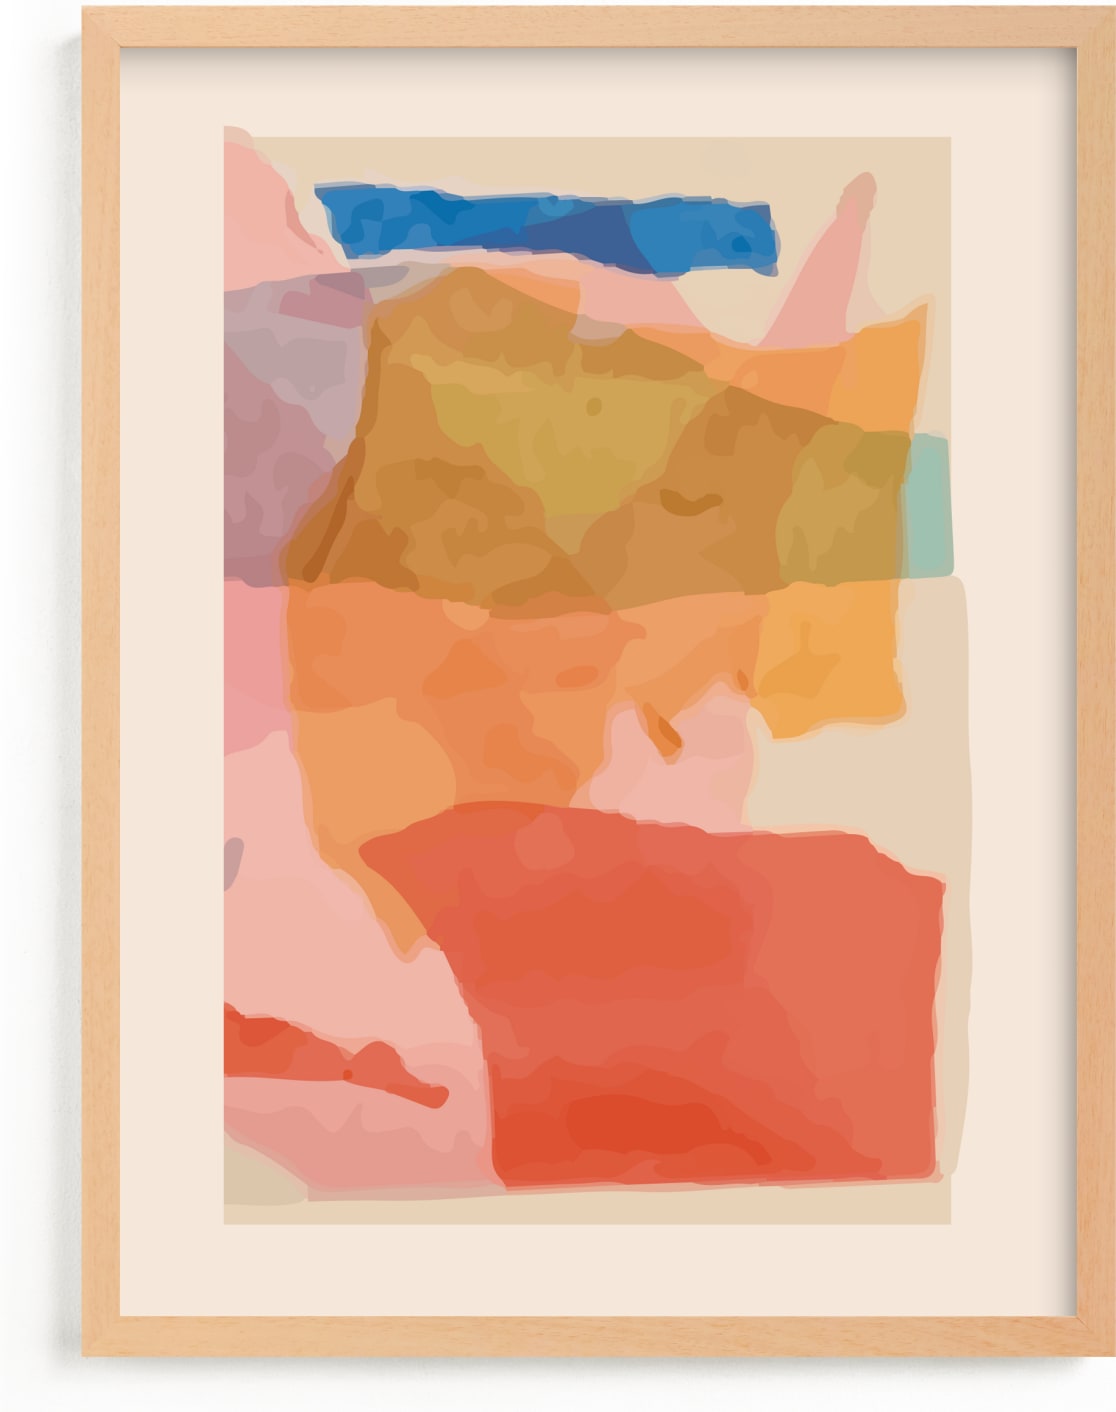 This is a yellow, pink, orange art by Stefania Copertini called TISSUES II.